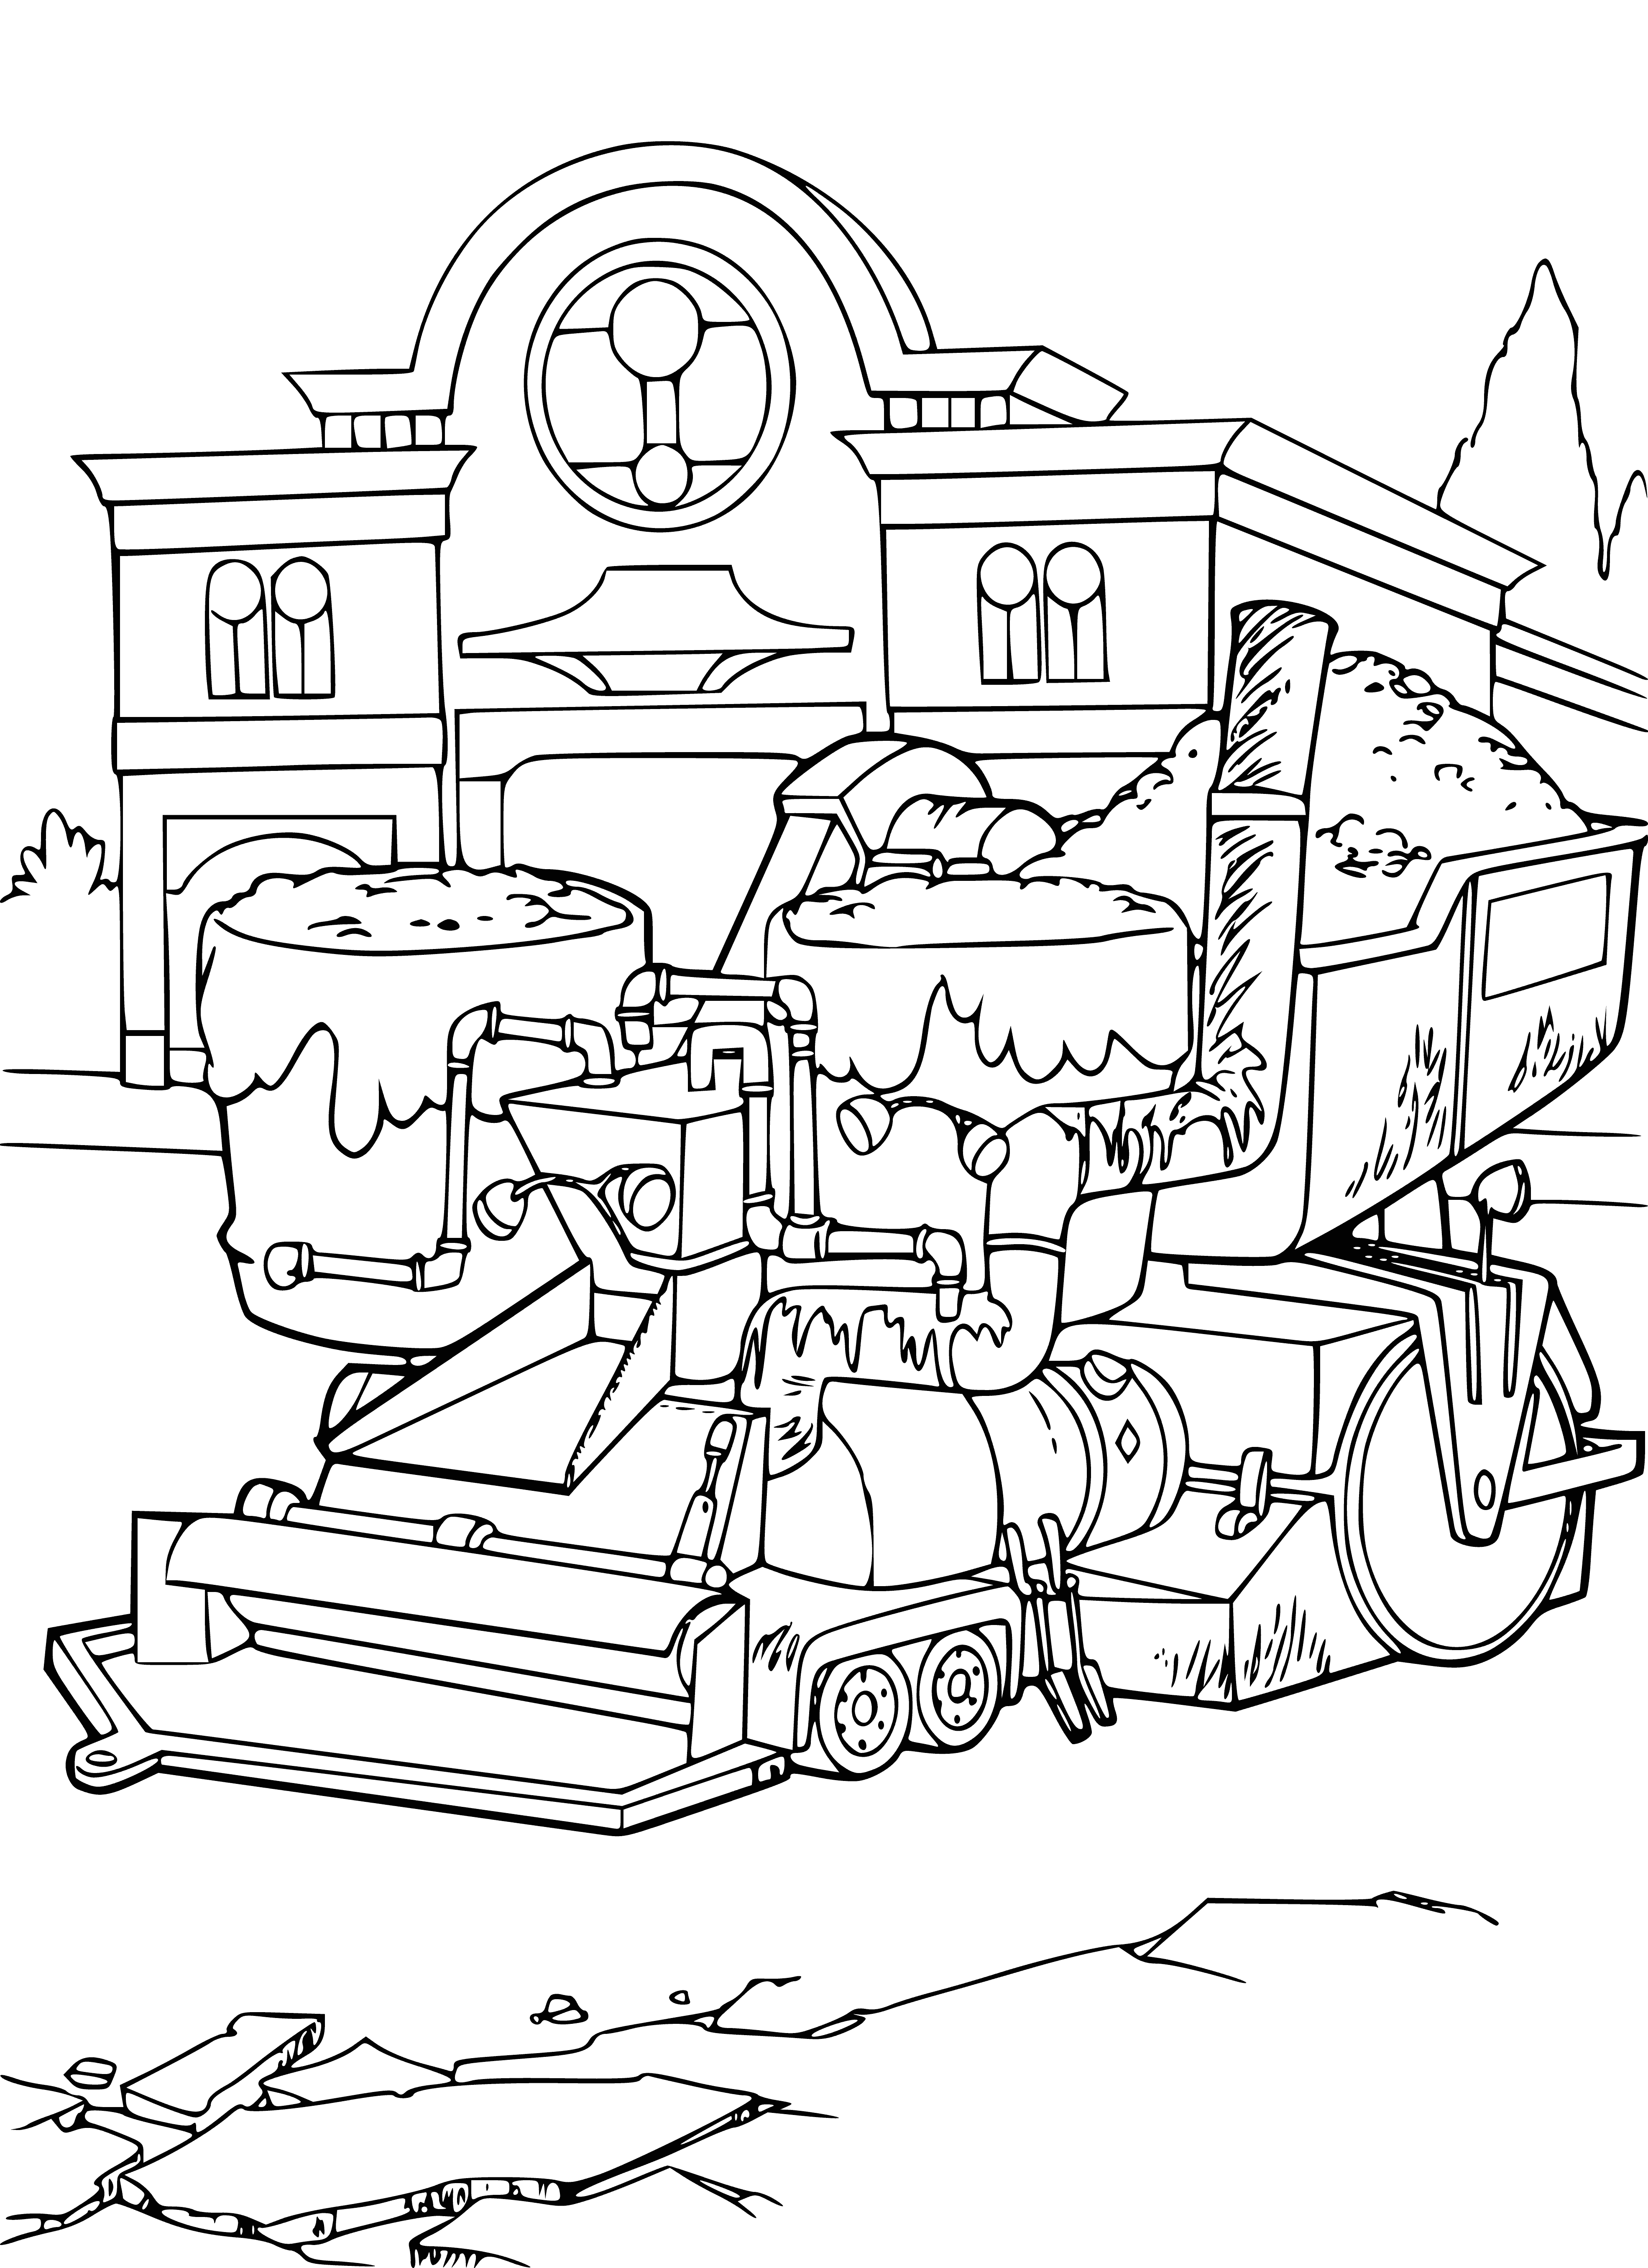 coloring page: Large, yellow machine w/ a long flat platform on front, round metal drum in middle. Three black conveyor belts along top. Black engine on back.